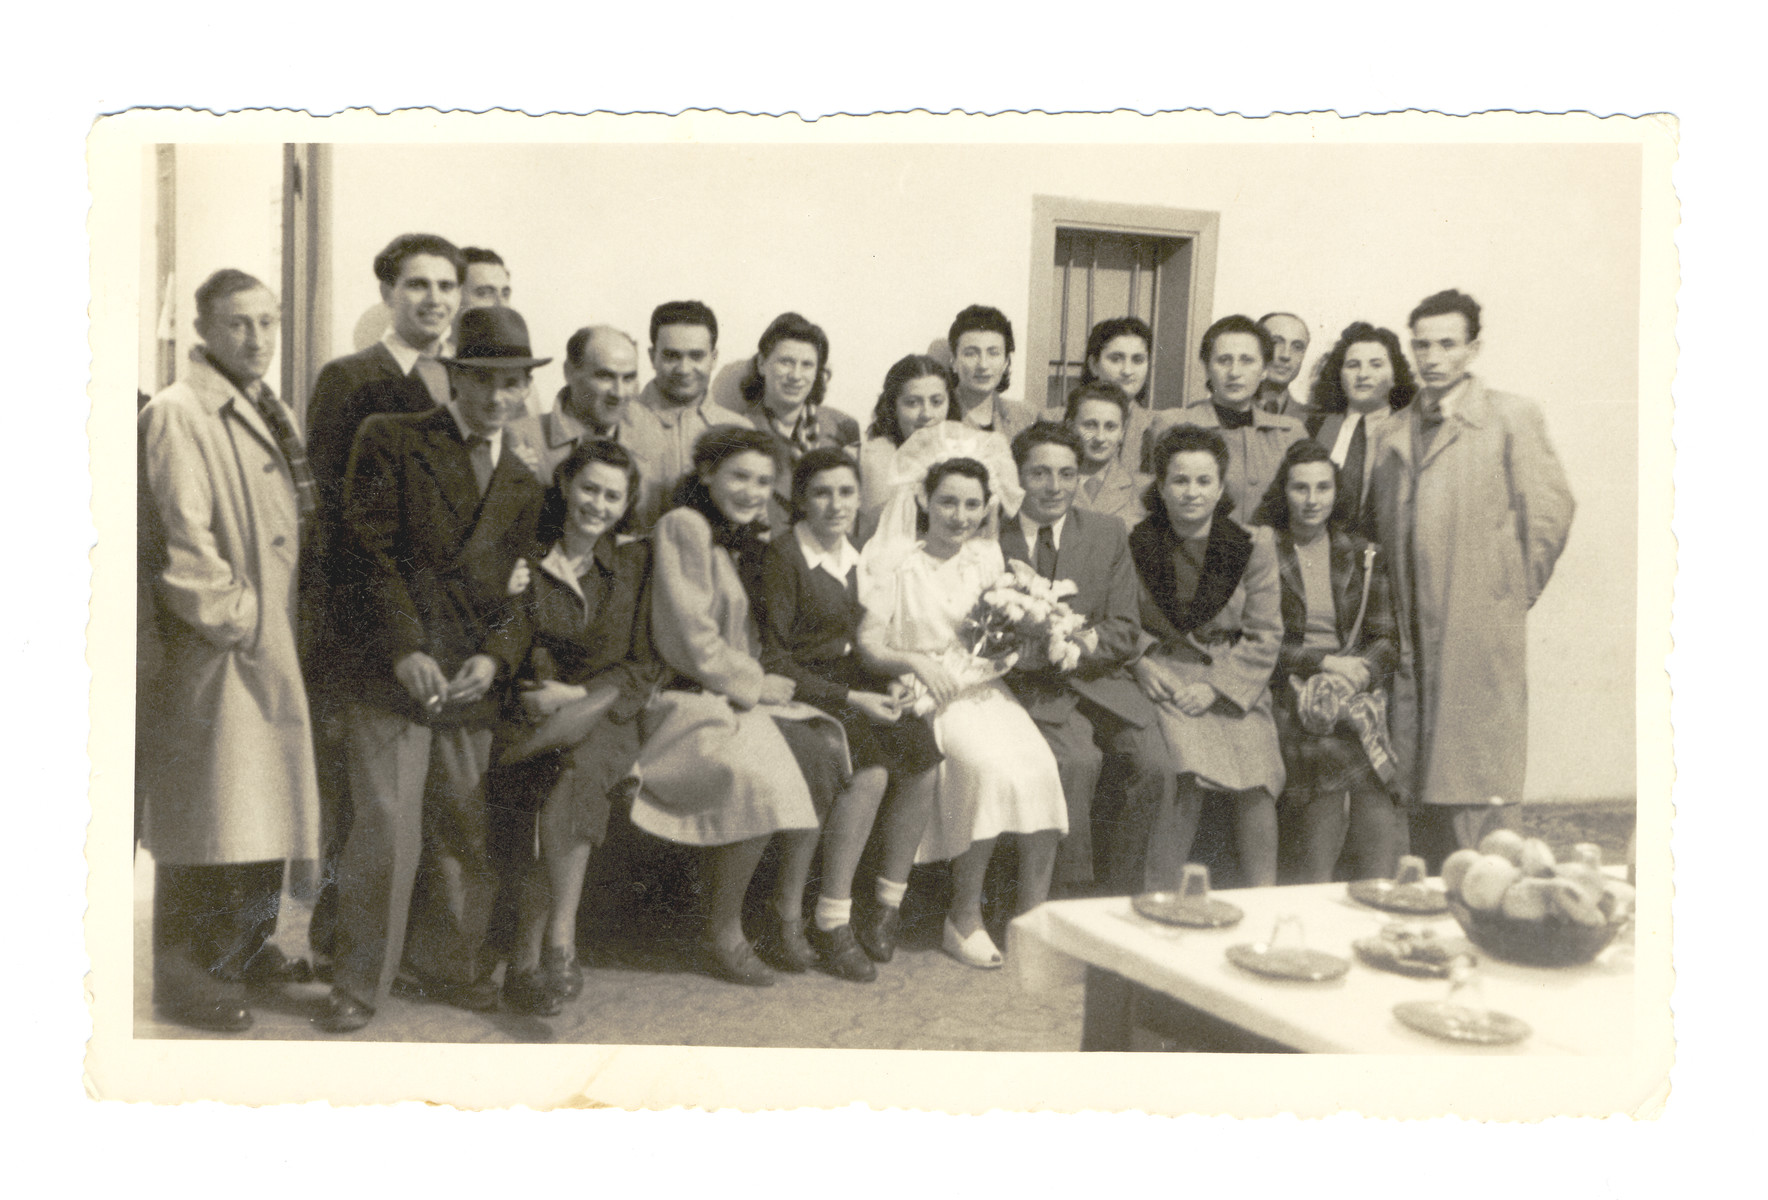 A recent immigrant couple poses on their wedding day surrounded by friends from an Italian displaced persons' camp and the illegal immigration ship, the Wingate.

Almost immediately after the wedding, the groom left to fight with the Haganna in the battles preceding the War of Independence.

Pictured in the center or Josef Fischer and his bride, Miraim Domawaska Fischer.  Next to Miriam is her sister Rivke Domawaska.  Next to Josef is Malka Yevelewicz who survived as a partisan.